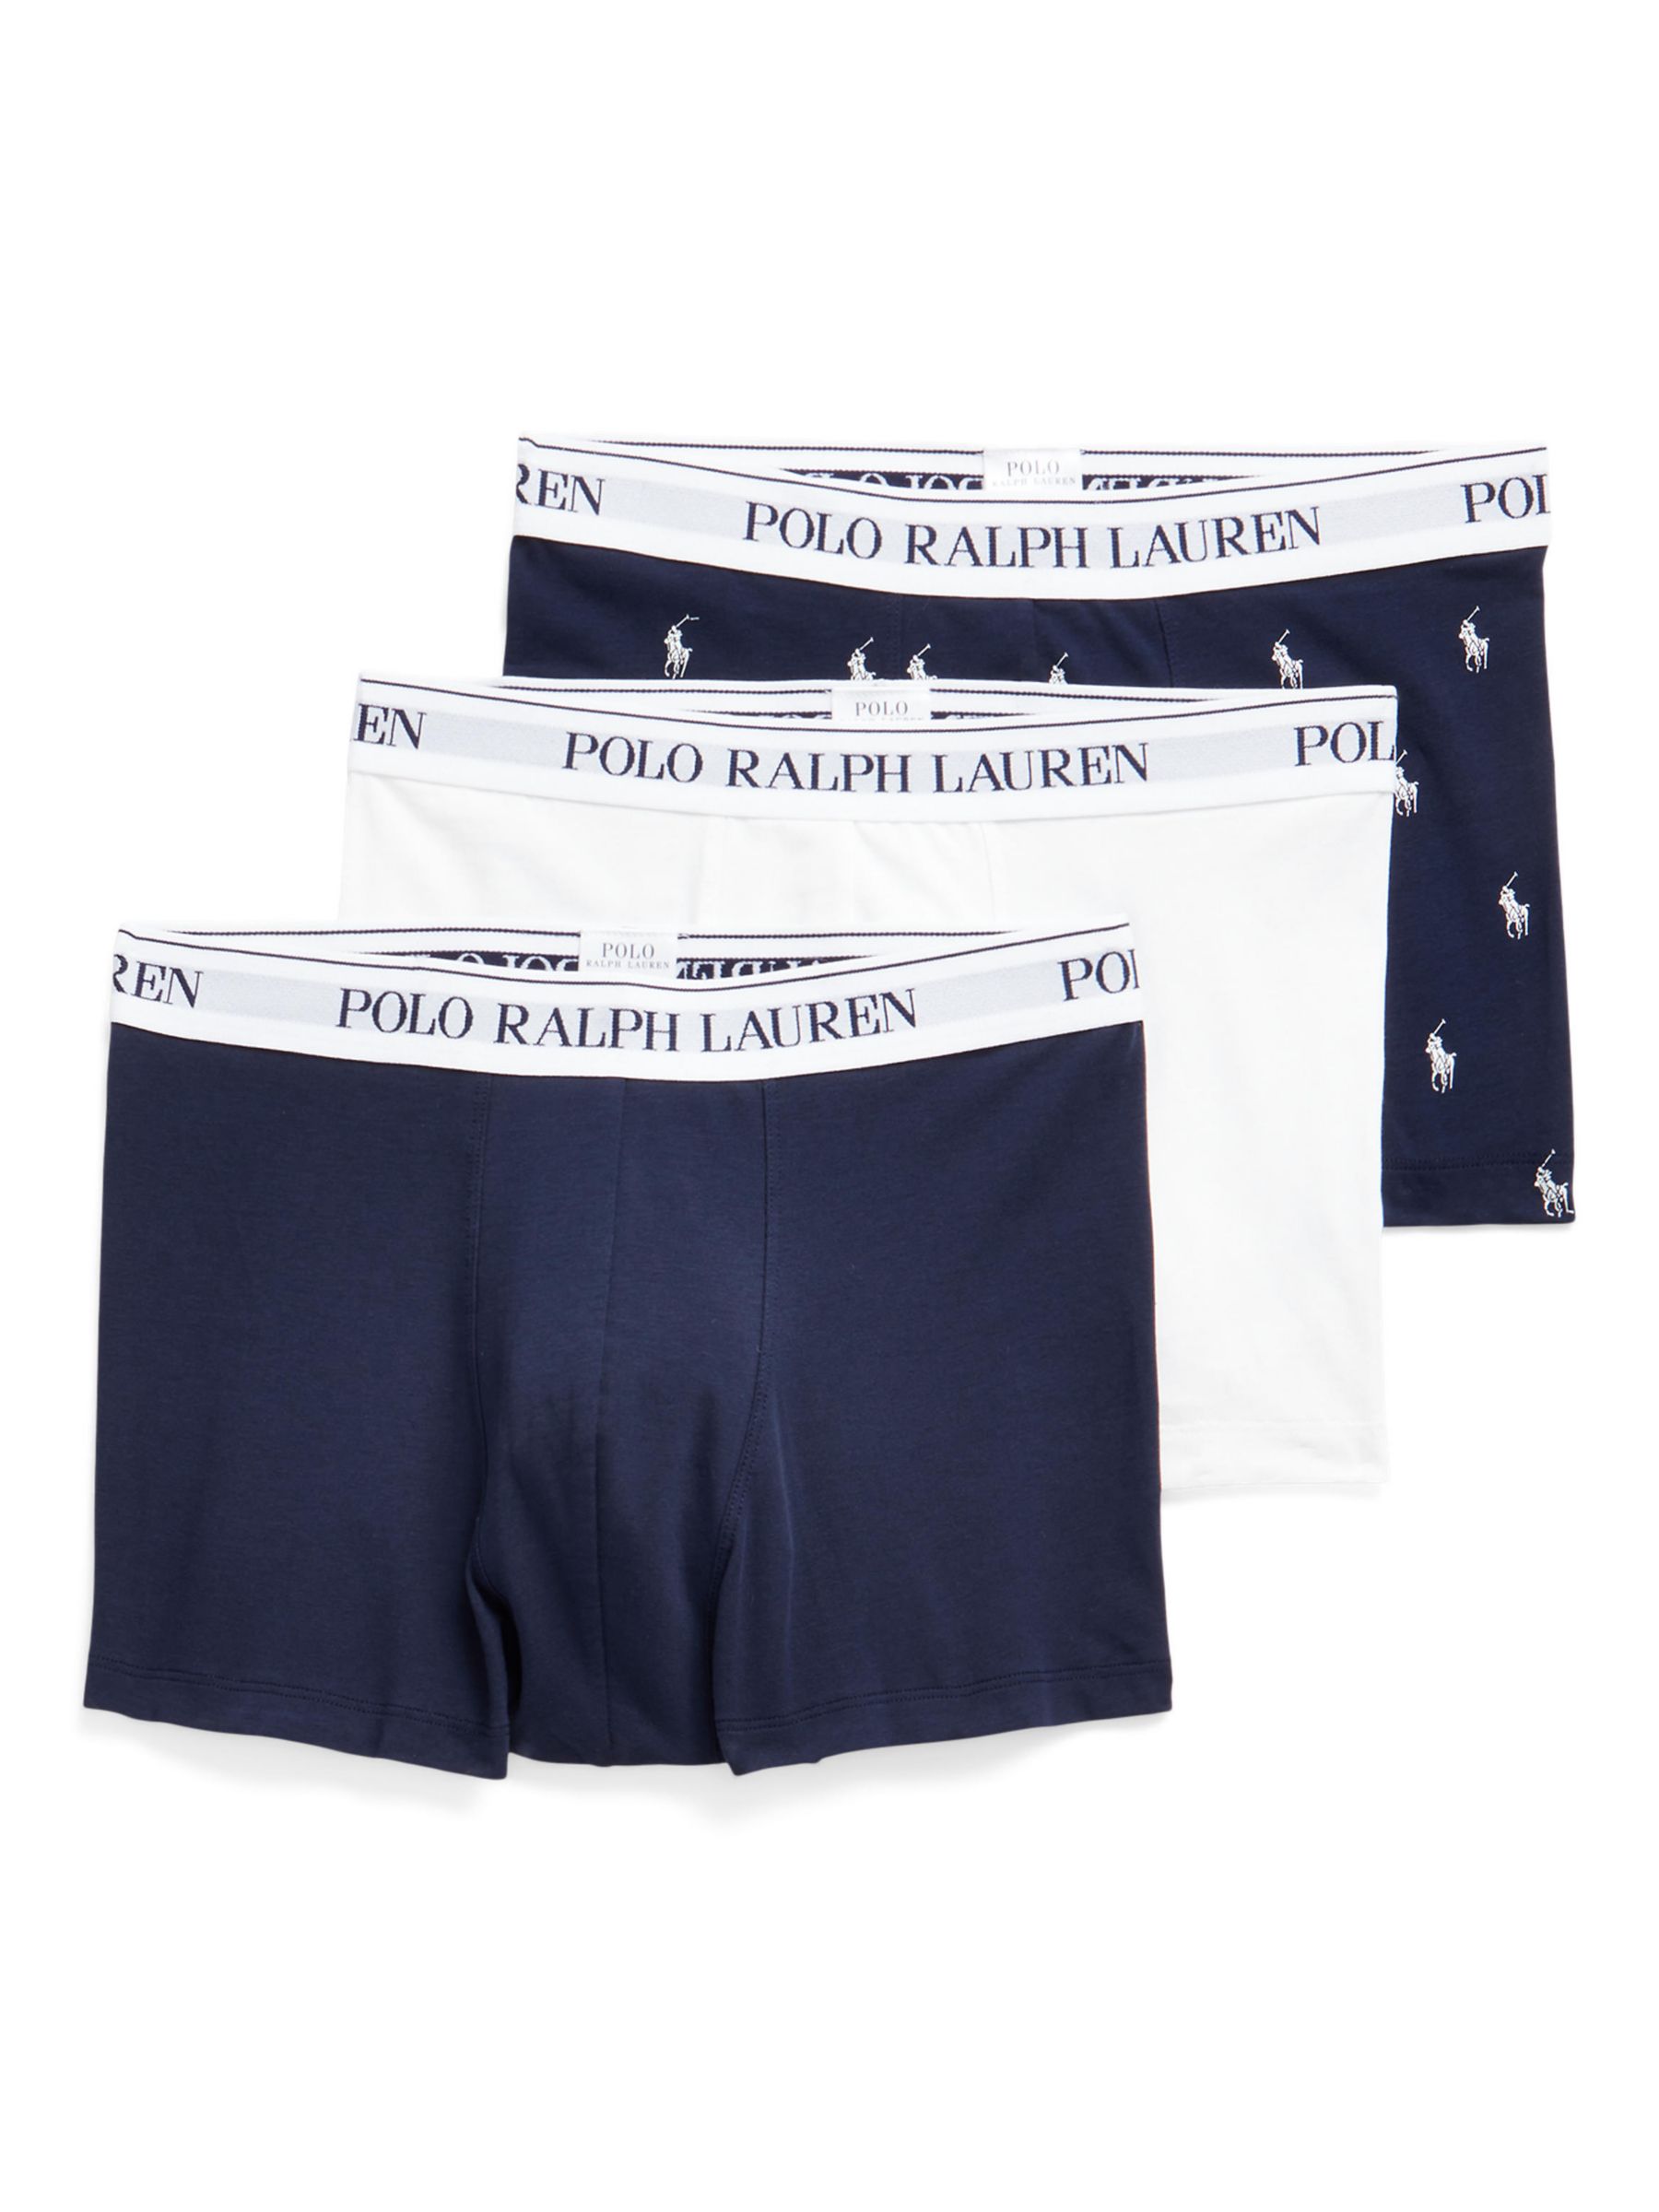 Polo Ralph Lauren Stretch Cotton Trunks, Pack of 3, Navy/White/Pony at John  Lewis & Partners